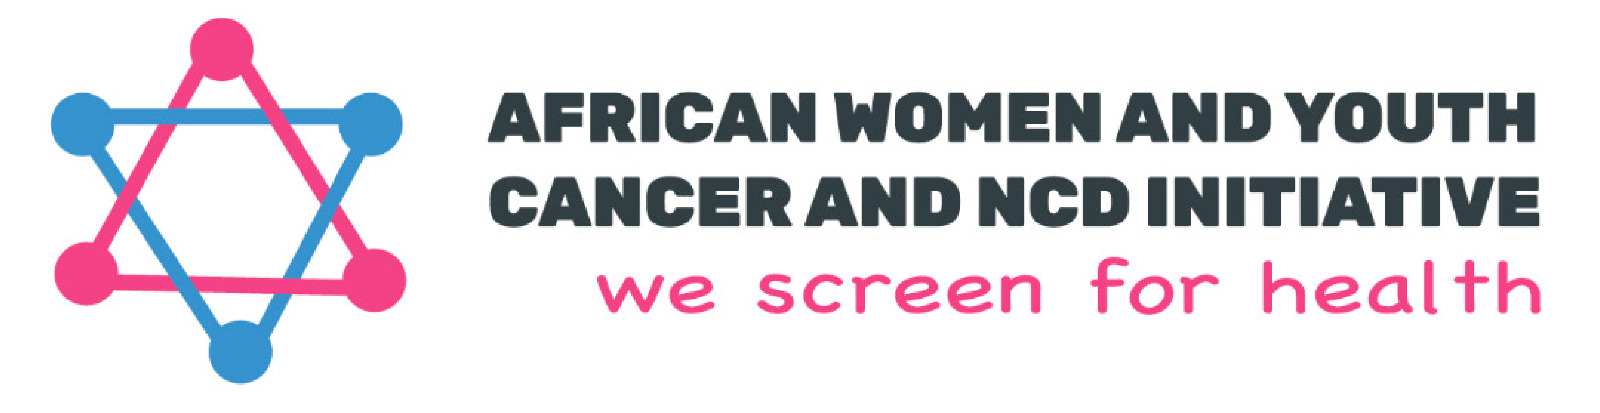 African Women and Youth Cancer and NCD Initiative 